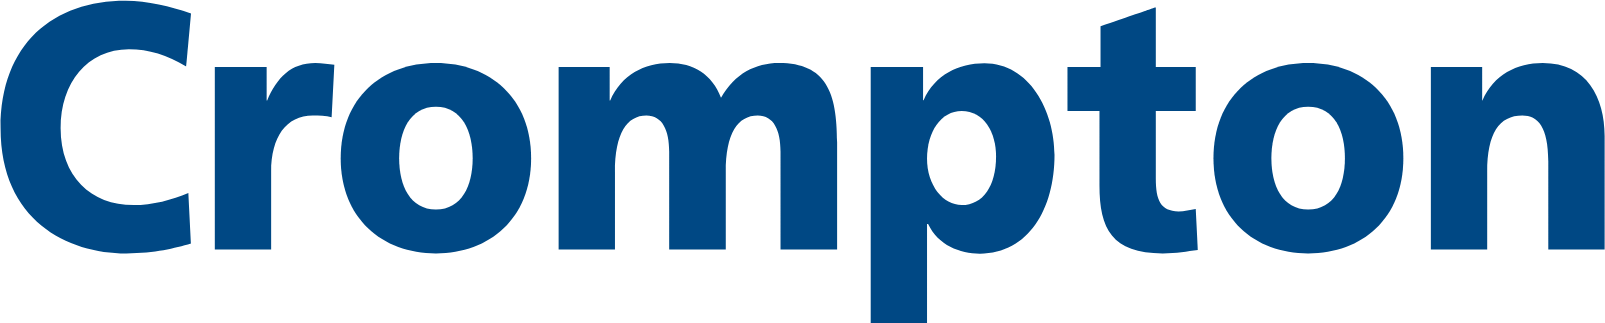 Crompton Greaves Consumer Electricals logo large (transparent PNG)